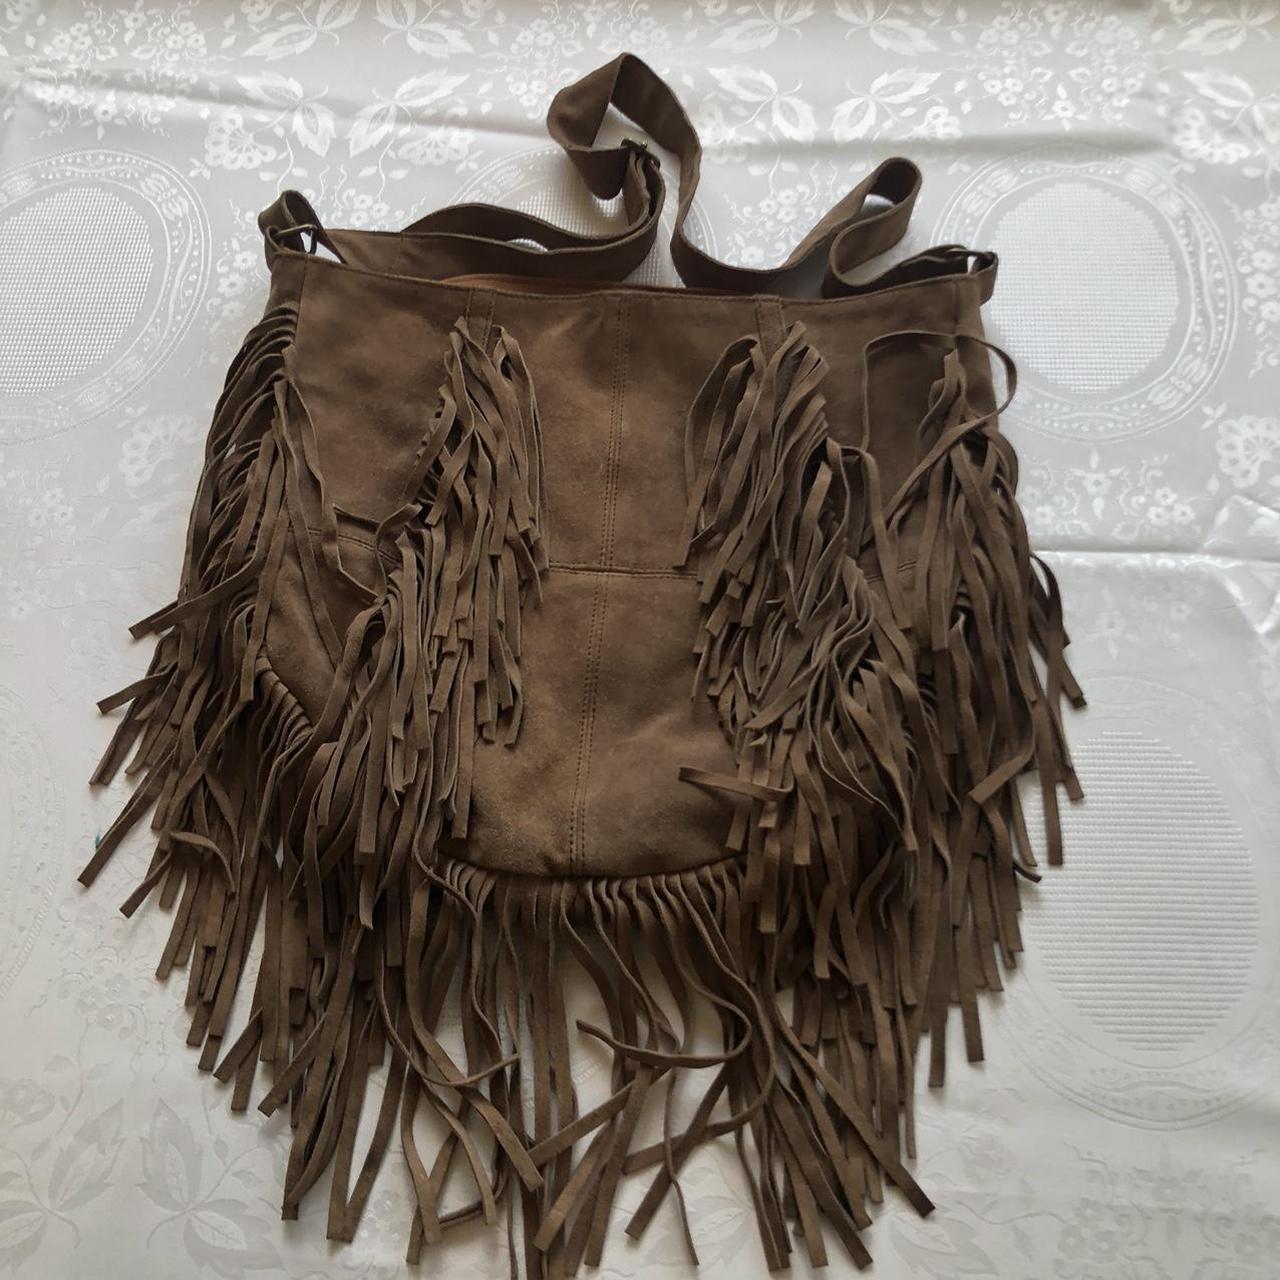 Product Image 1 - Forever 21 Brown Boho Chic